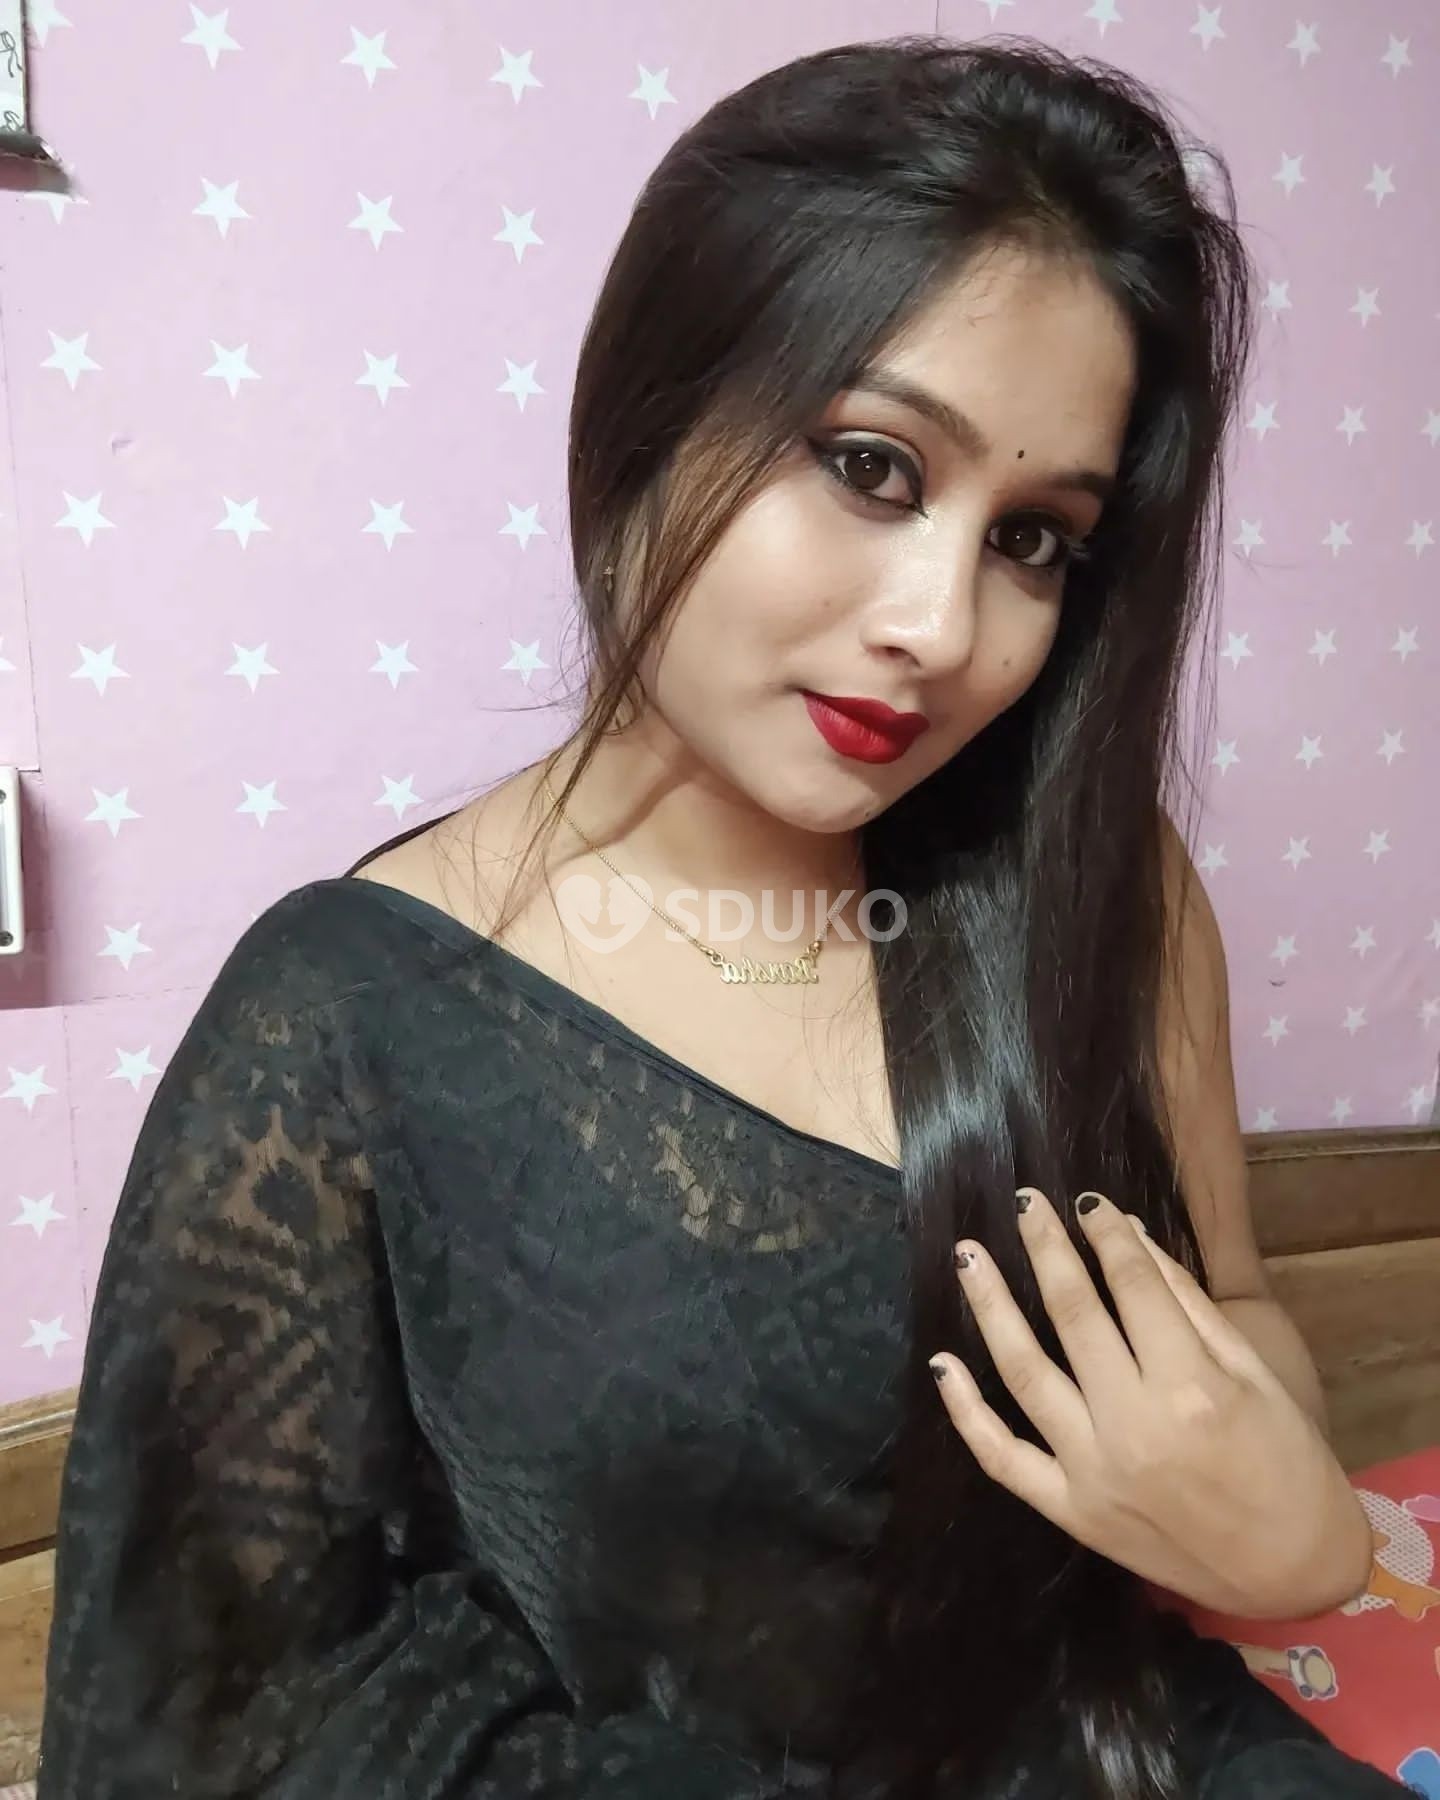 Bhopal %🆑 TODAY LOW PRICE 100% SAFE AND SECURE GENUINE CALL GIRL AFFORDABLE PRICE CALL NOW